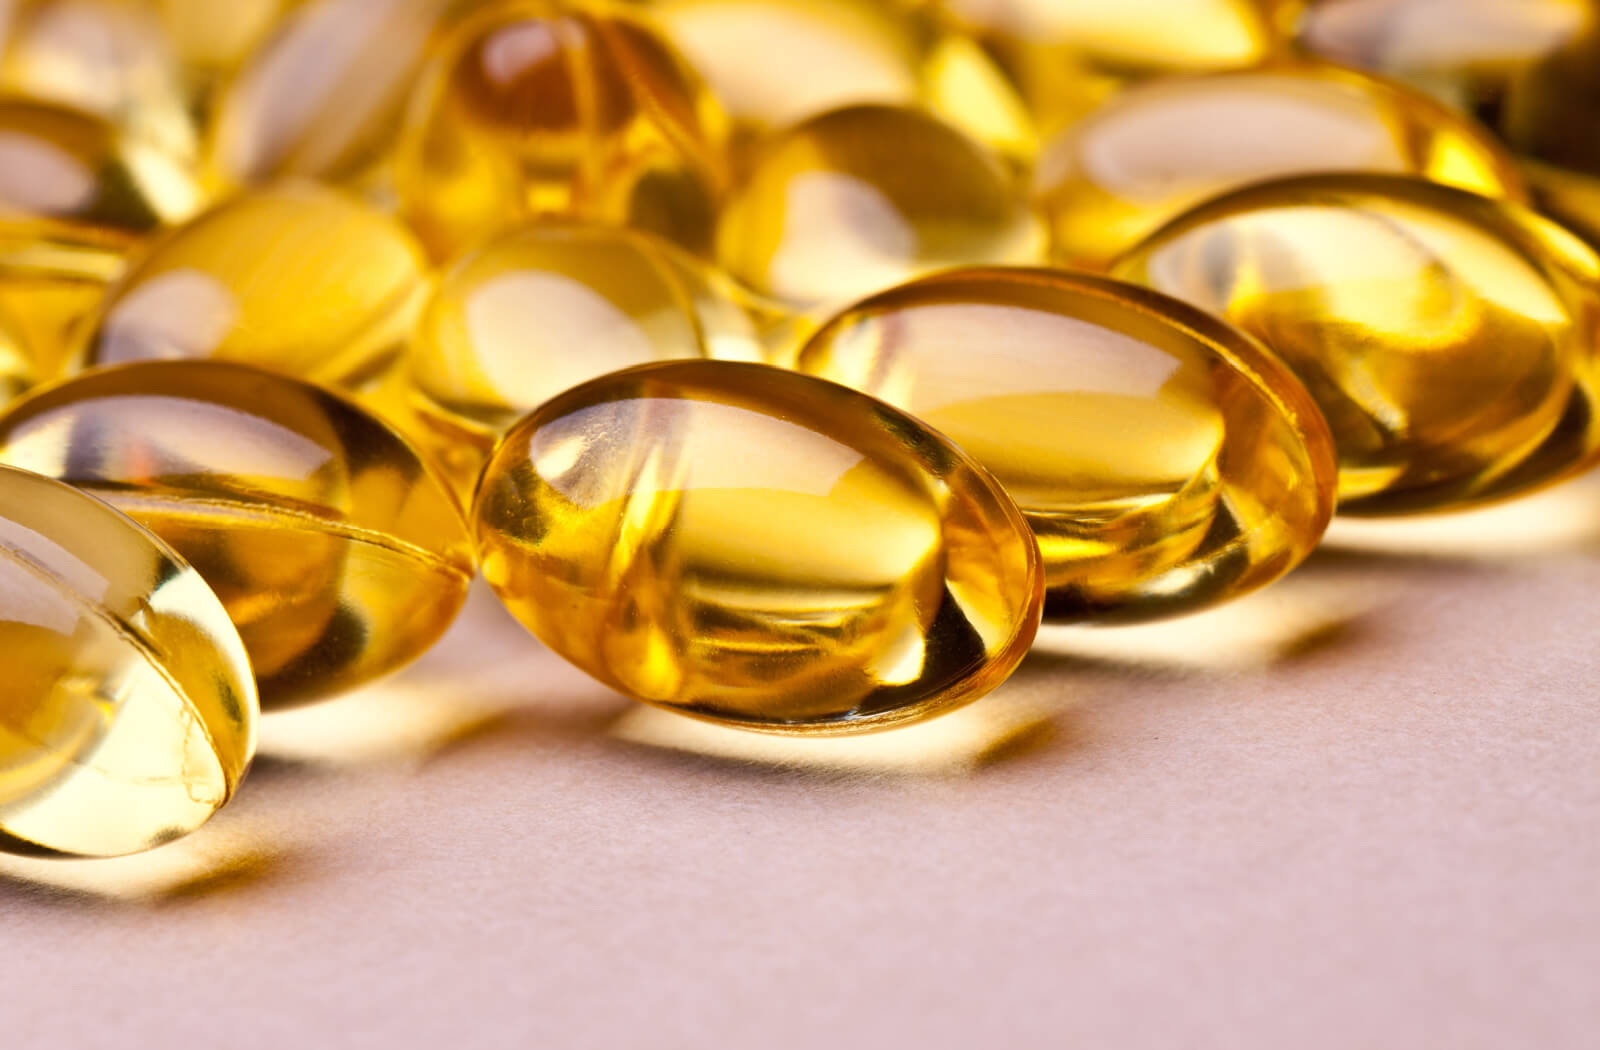 A close-up of a bundle of omega-3 supplements.